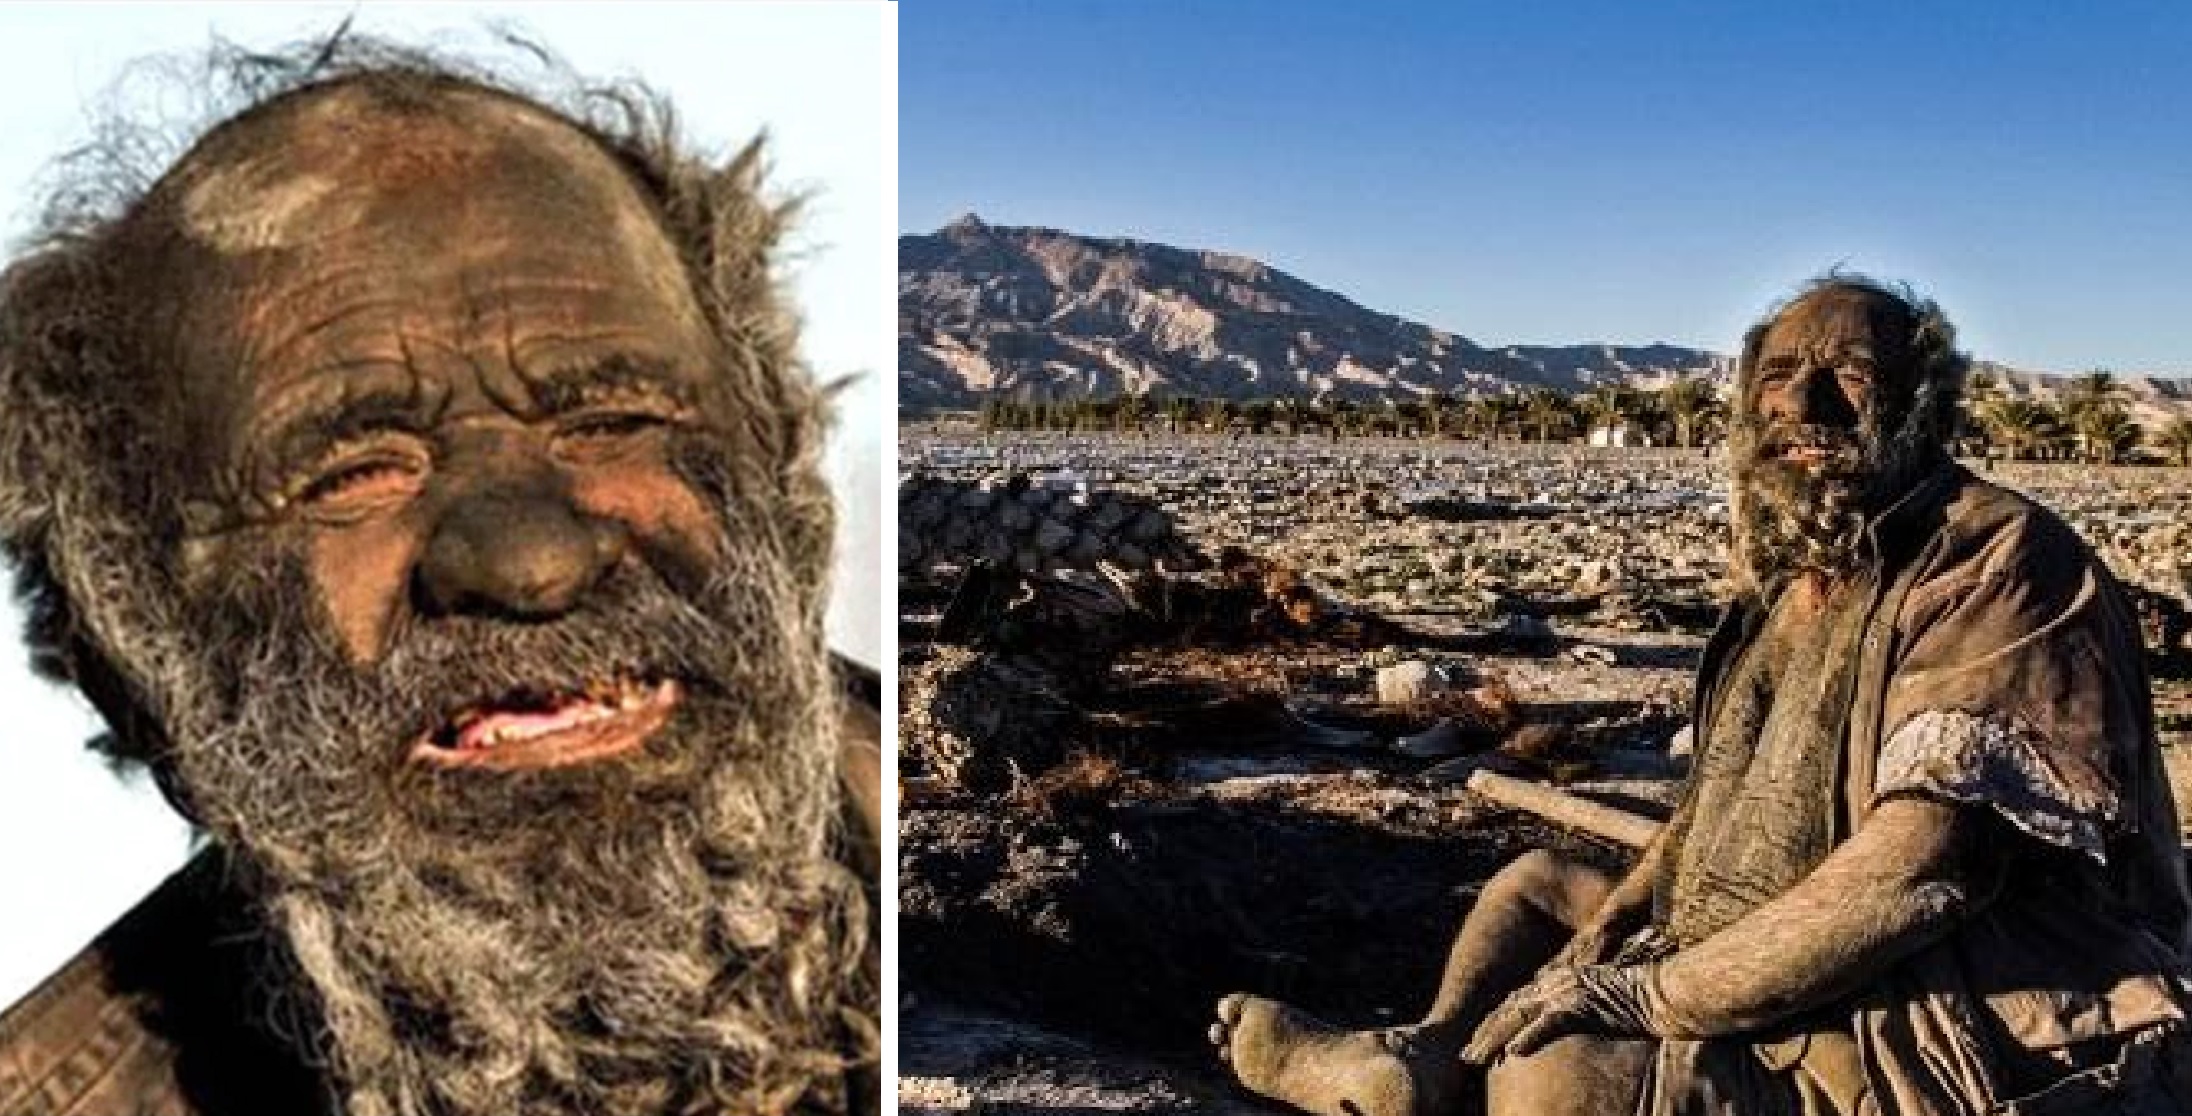 Amou Haji – Who Went Viral As ‘World’s Dirtiest Man’ Dies At 94, Months After Taking First Bath In 60 Years